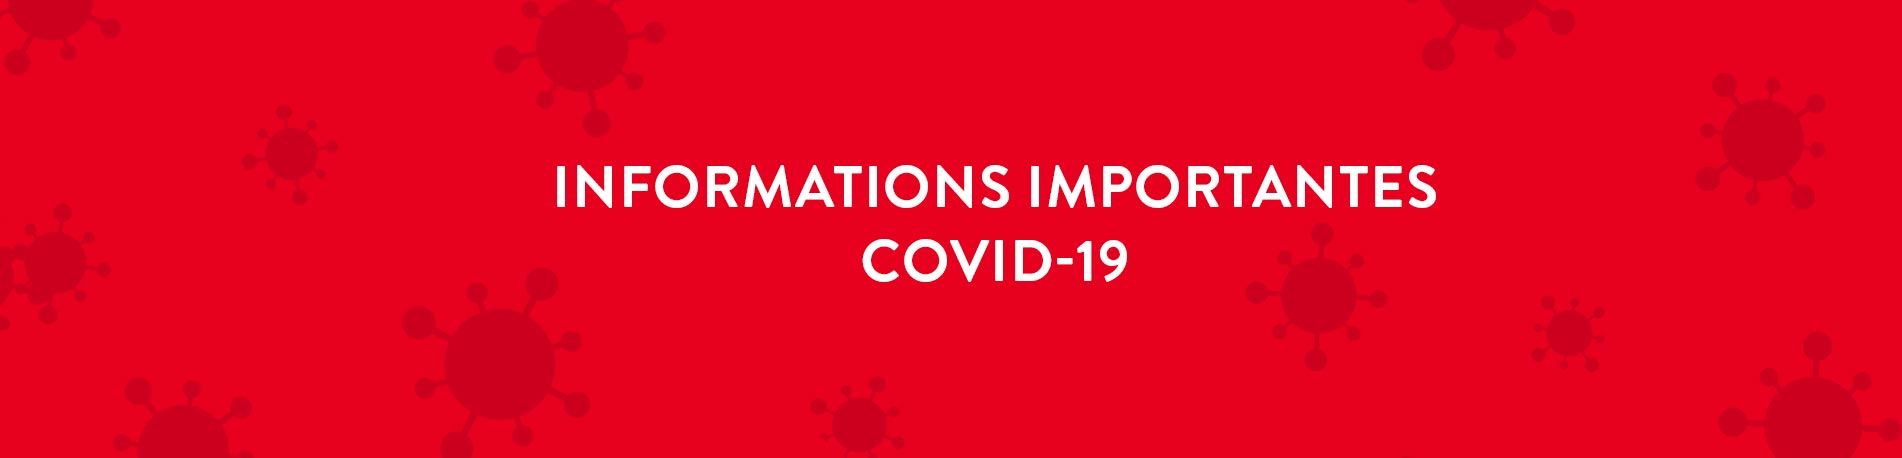 Informations COVID-19